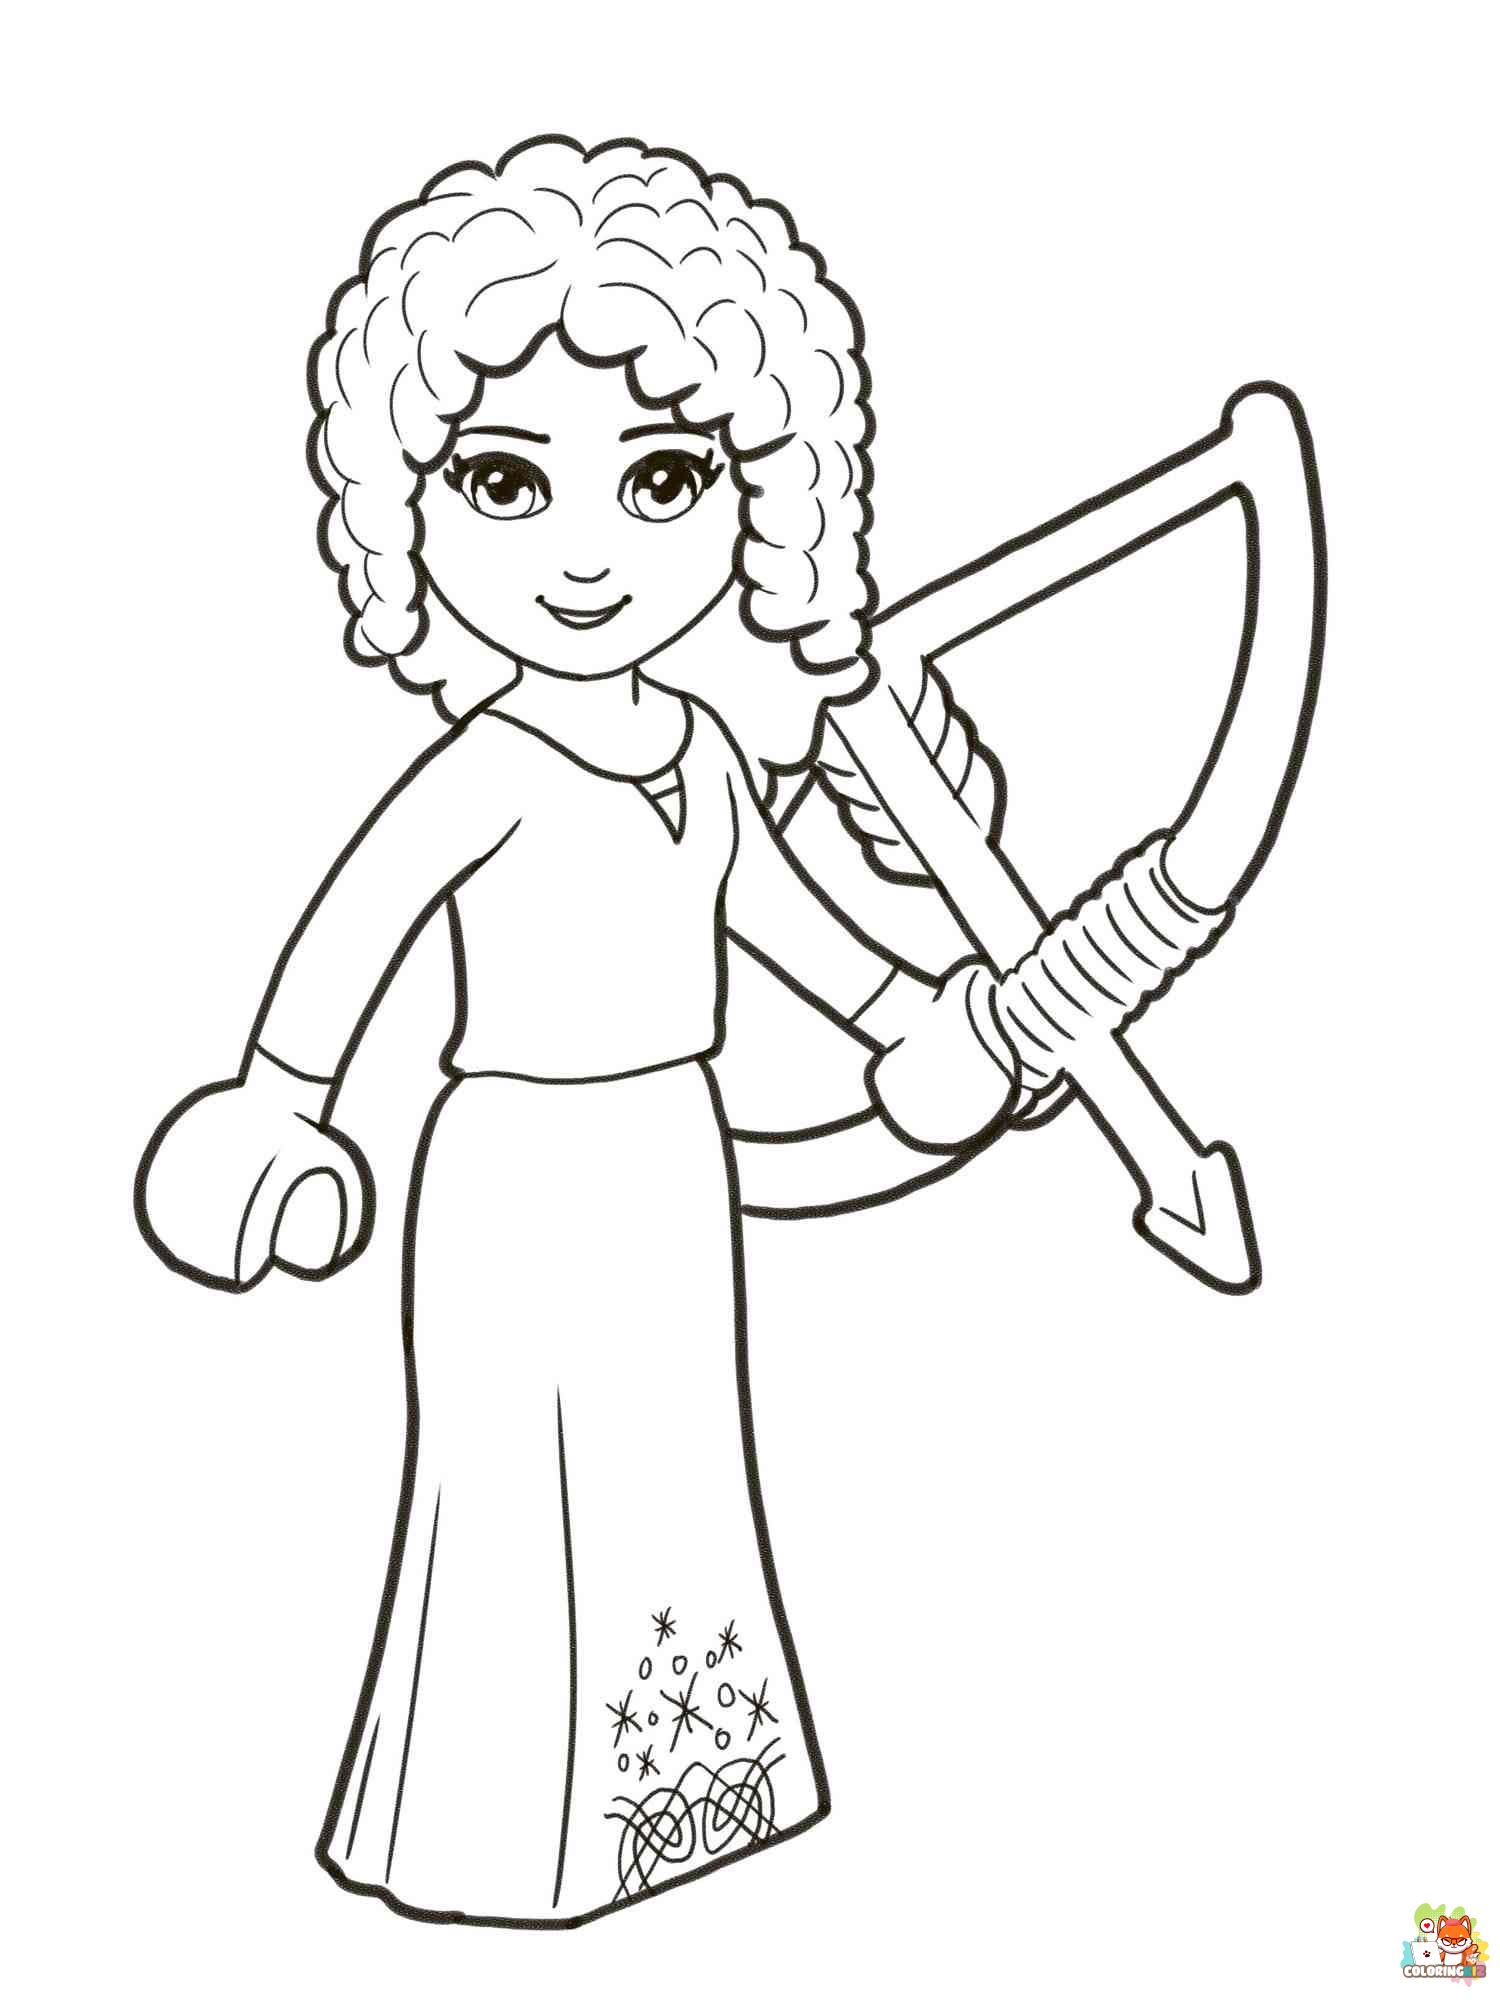 Lego Princess Coloring Pages 8